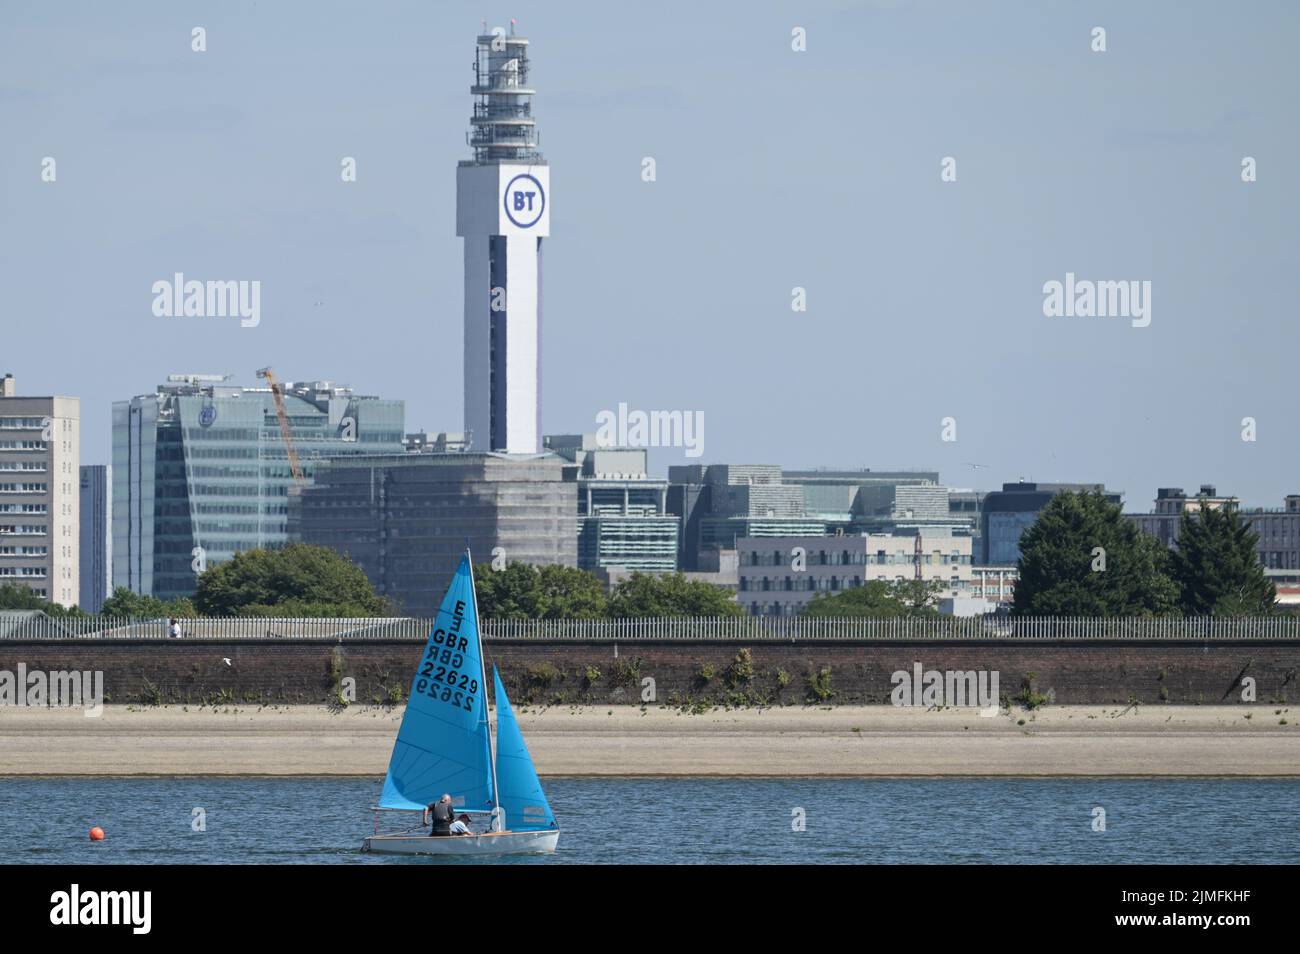 Edgbaston Reservoir, Birmingham, England, August 6th 2022. - Recreational sailors took to the low waters of Edgbaston Reservoir in the blaring sun on Saturday afternoon. The boats passed the backdrop of the city centre with the BT Tower and 103 Colmore Row with the Commonwealth Games signage. The water level is very low due to several weeks of dry weather. Pic by Credit: Michael Scott/Alamy Live News Stock Photo